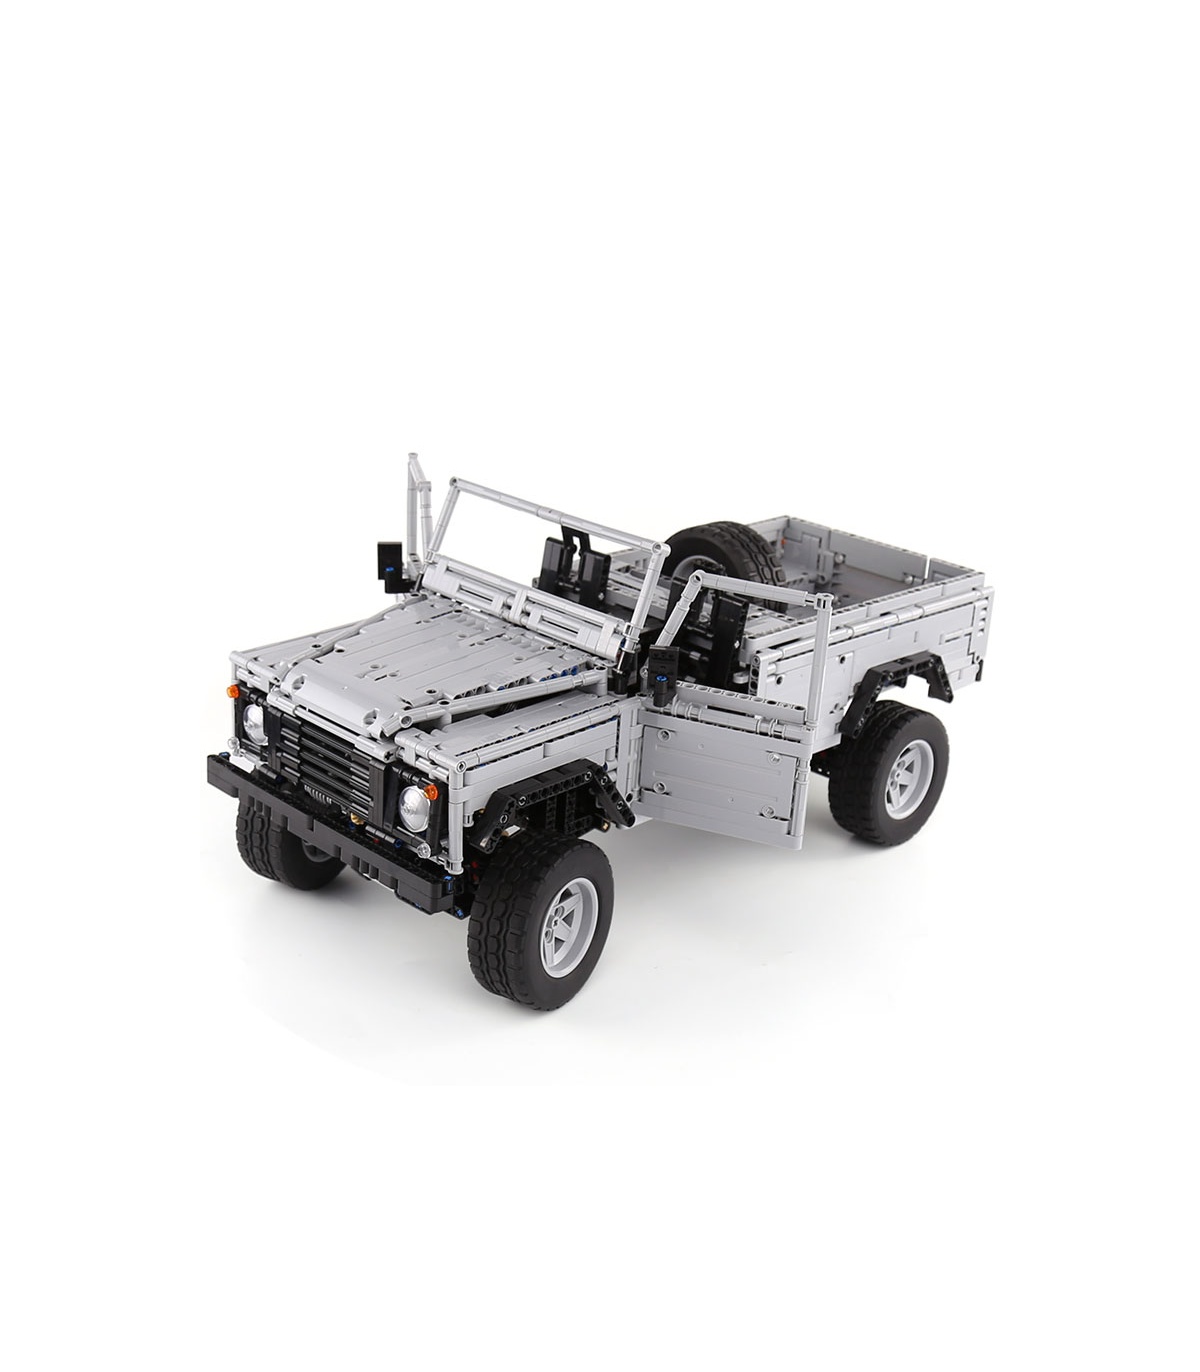 Details about   New MOC Designed Off-Road Jeep Vehicle SUV Car Building Bricks Classic Toys 